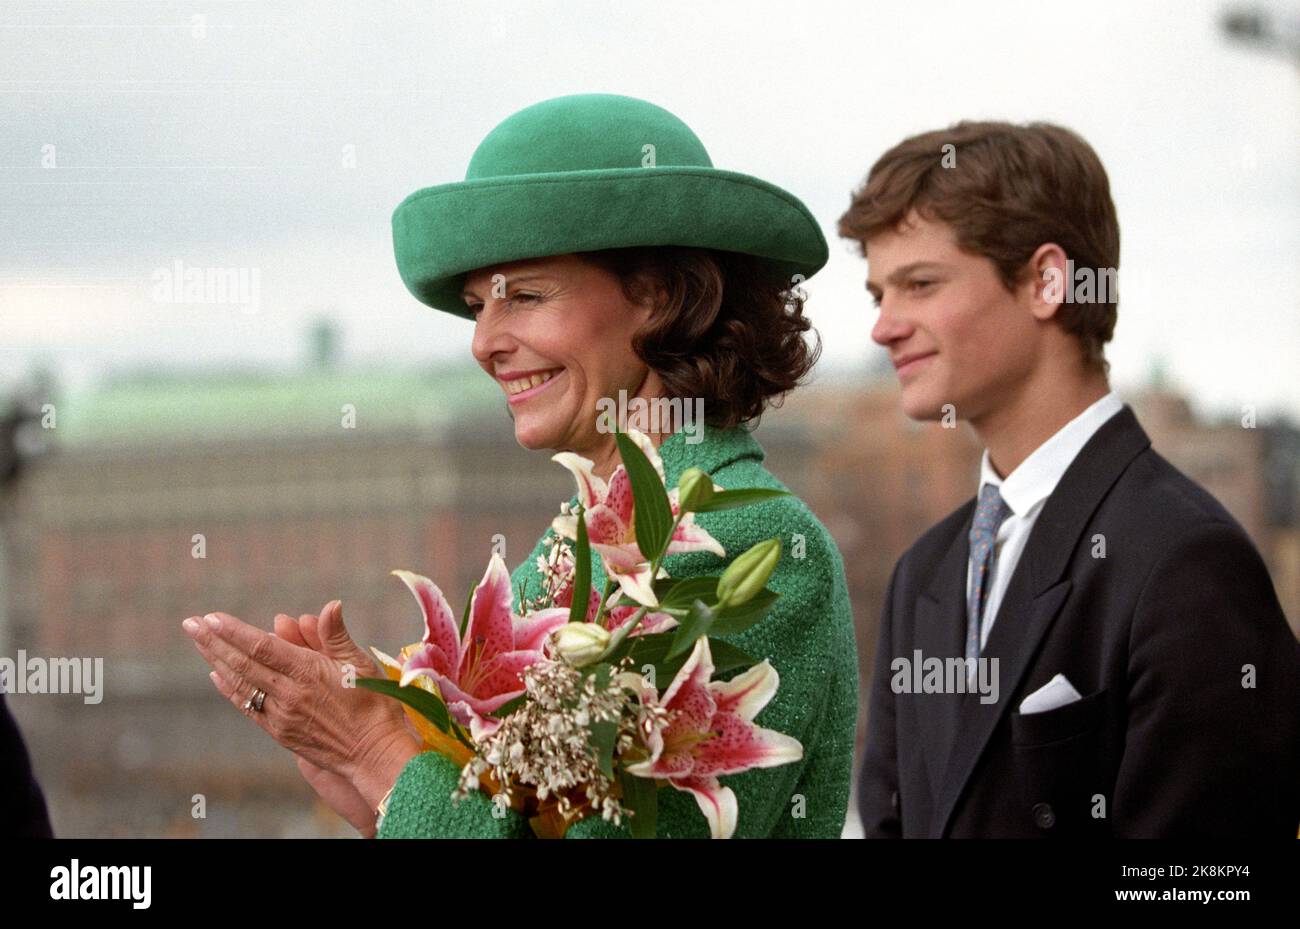 Stockholm 199604: King Carl XVI Gustaf 50 years - several days of annual party for Sweden's king. Picture: The actual birthday on April 30. Queen Silvia and Prince Carl Philip photographed at the castle. 2000 singers paid tribute to the king. Photo: Bjørn Sigurdsøn / NTB / NTB Stock Photo